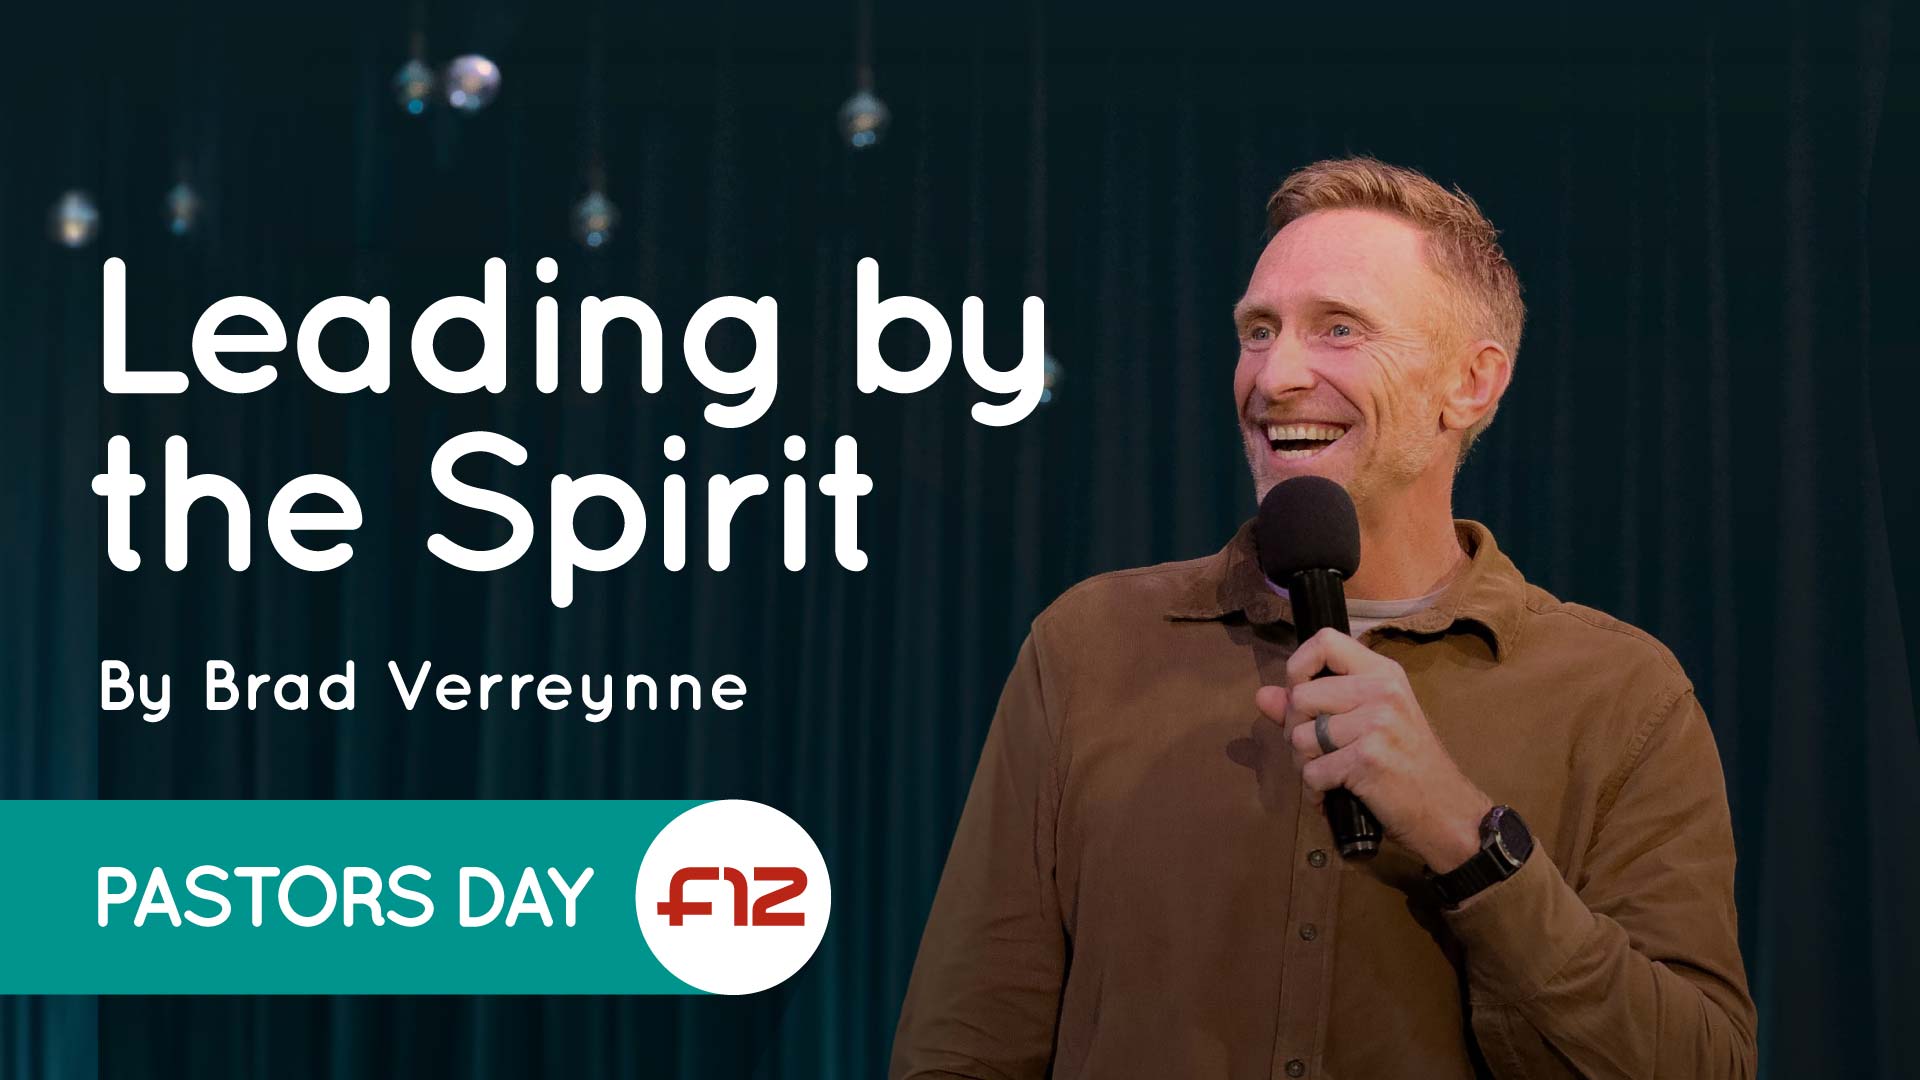 Video image for ‘Leading by The Spirit’ about allowing the Holy Spirit to lead our meetings